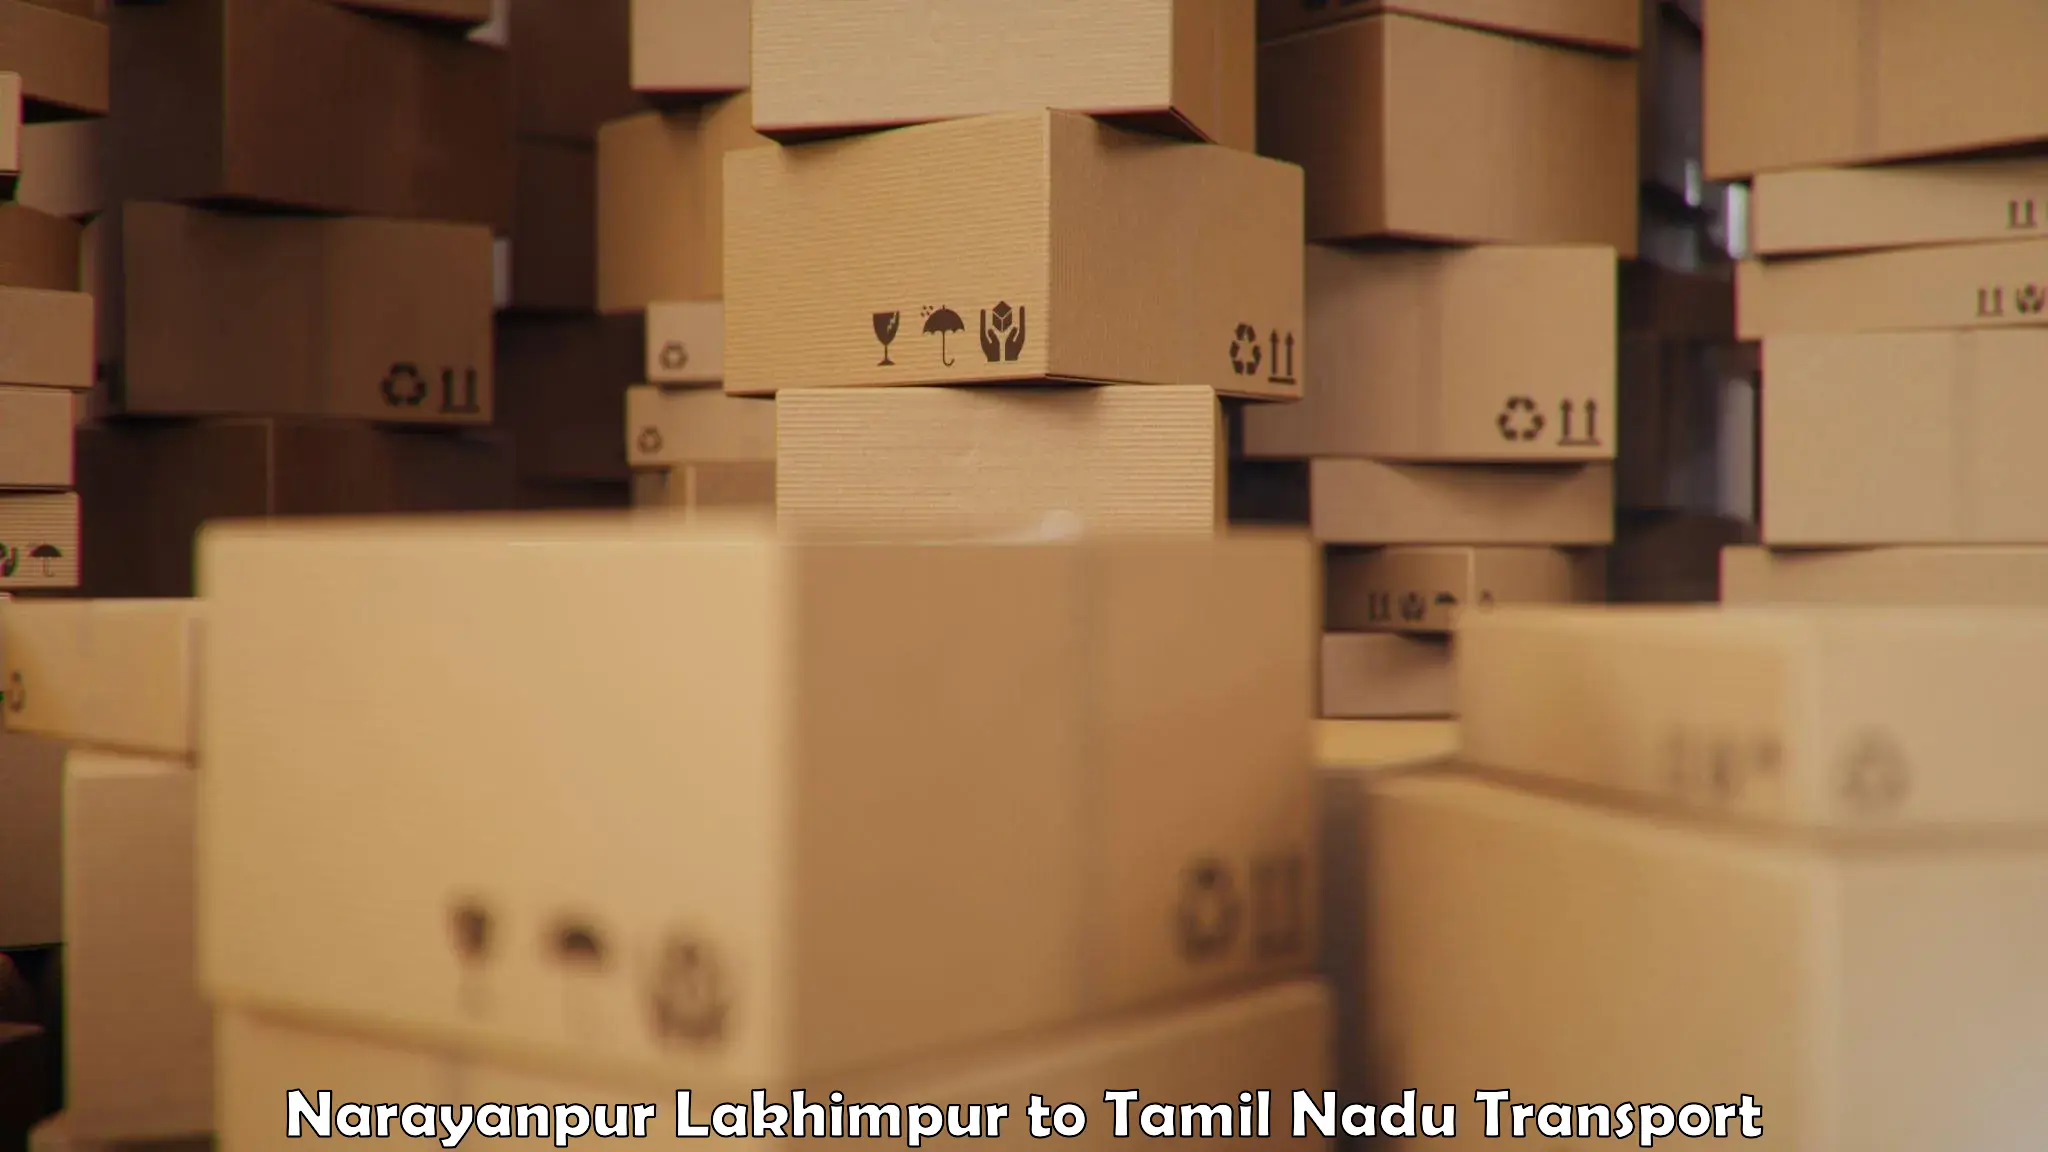 Daily parcel service transport Narayanpur Lakhimpur to Ennore Port Chennai